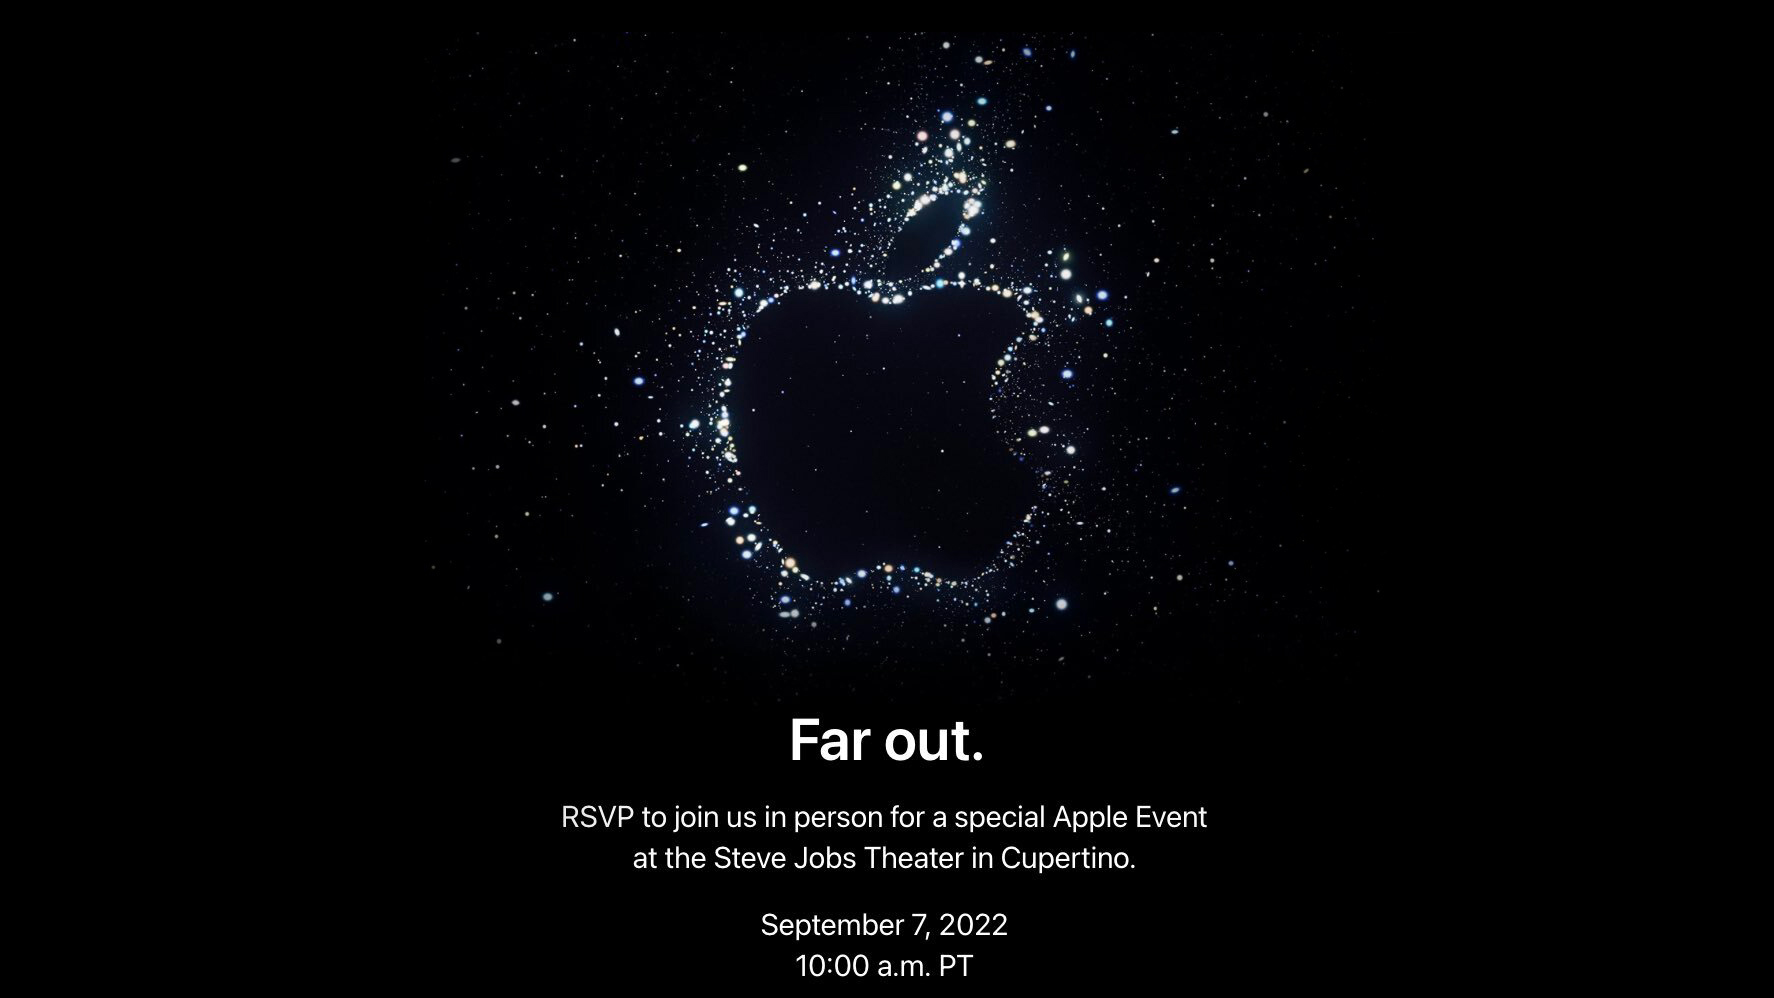 How to Watch the ‘Far Out’ Apple Event on Wednesday, September 7